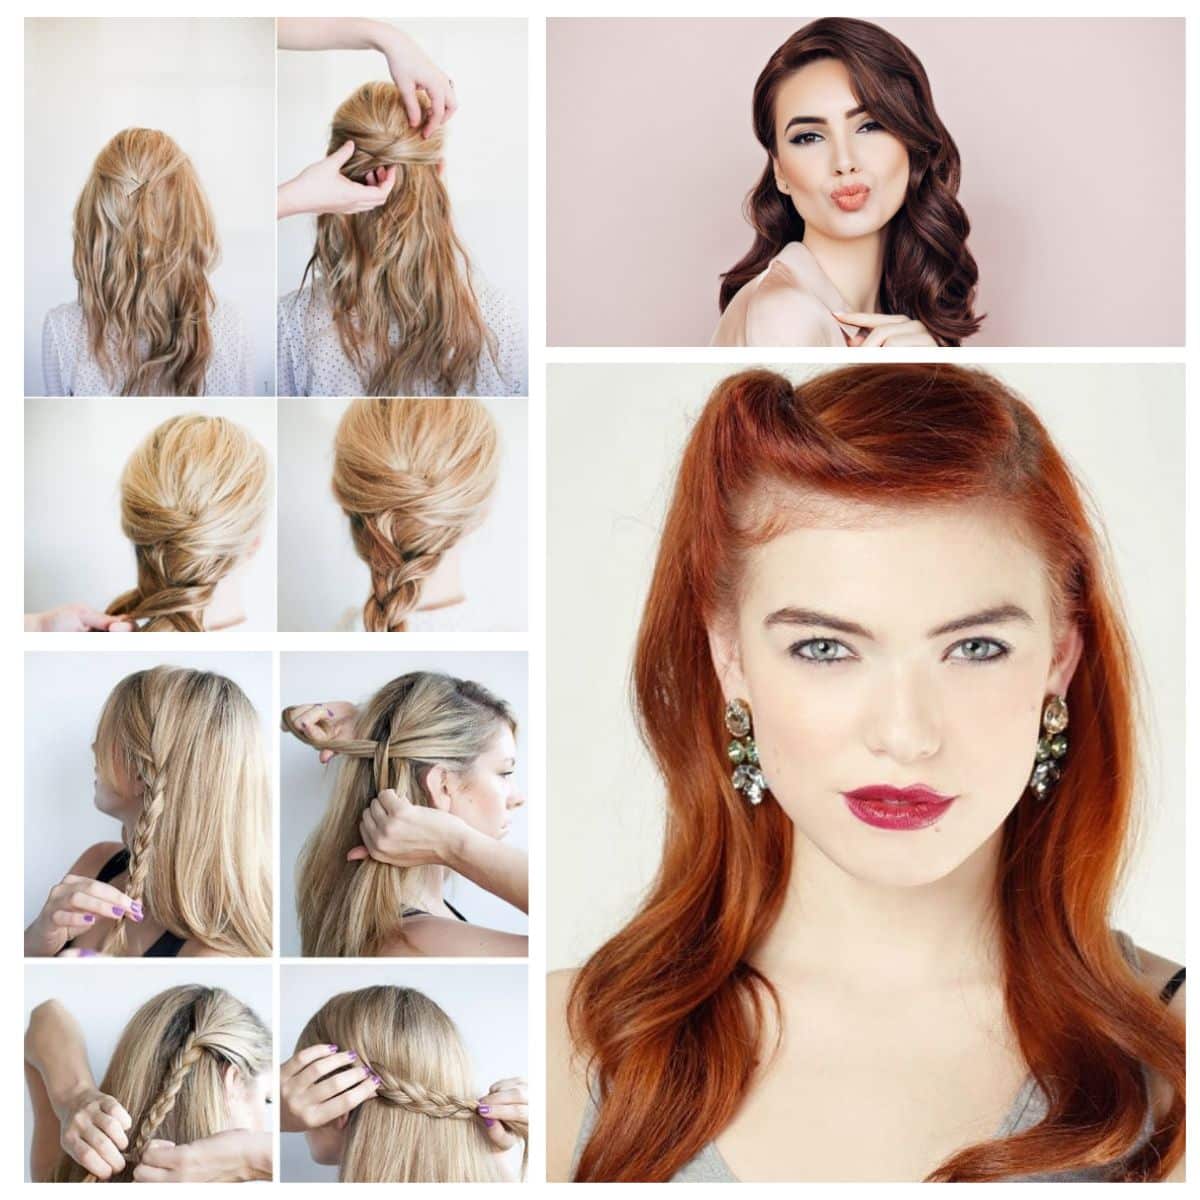 12 Super Easy Hairdos for Those Lazy Days - Live Better Lifestyle